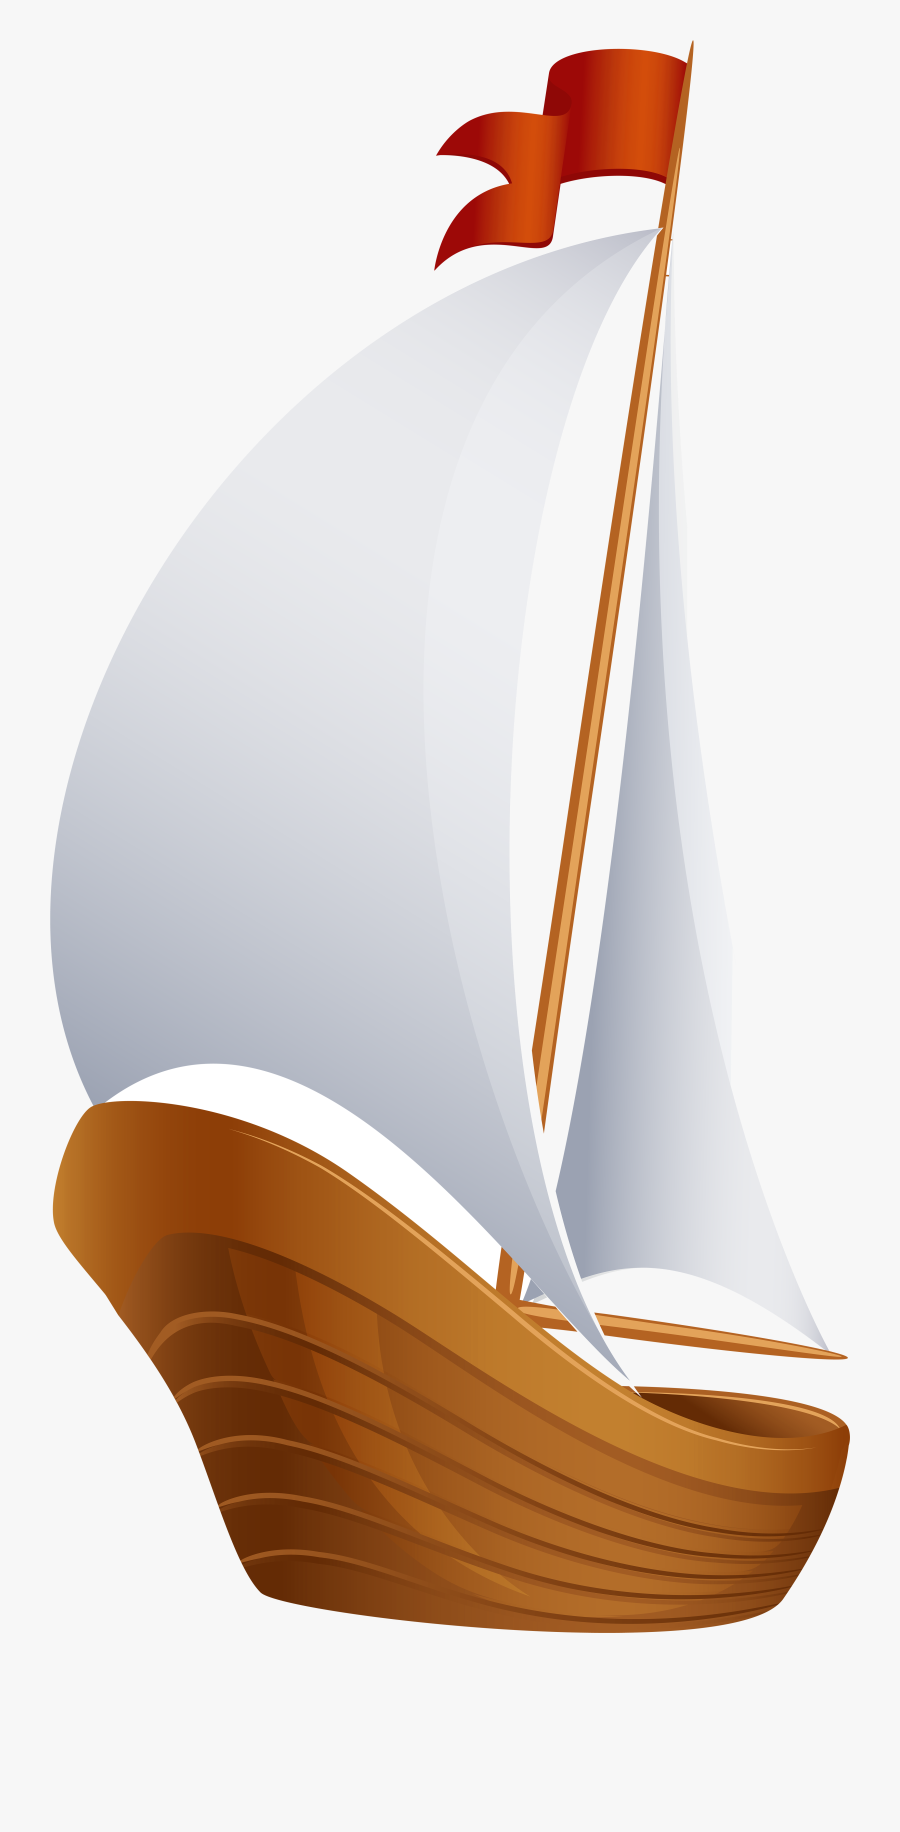 Sailboat Clip Art Image Gallery High-quality Transparent - Sailboat Clipart Transparent, Transparent Clipart